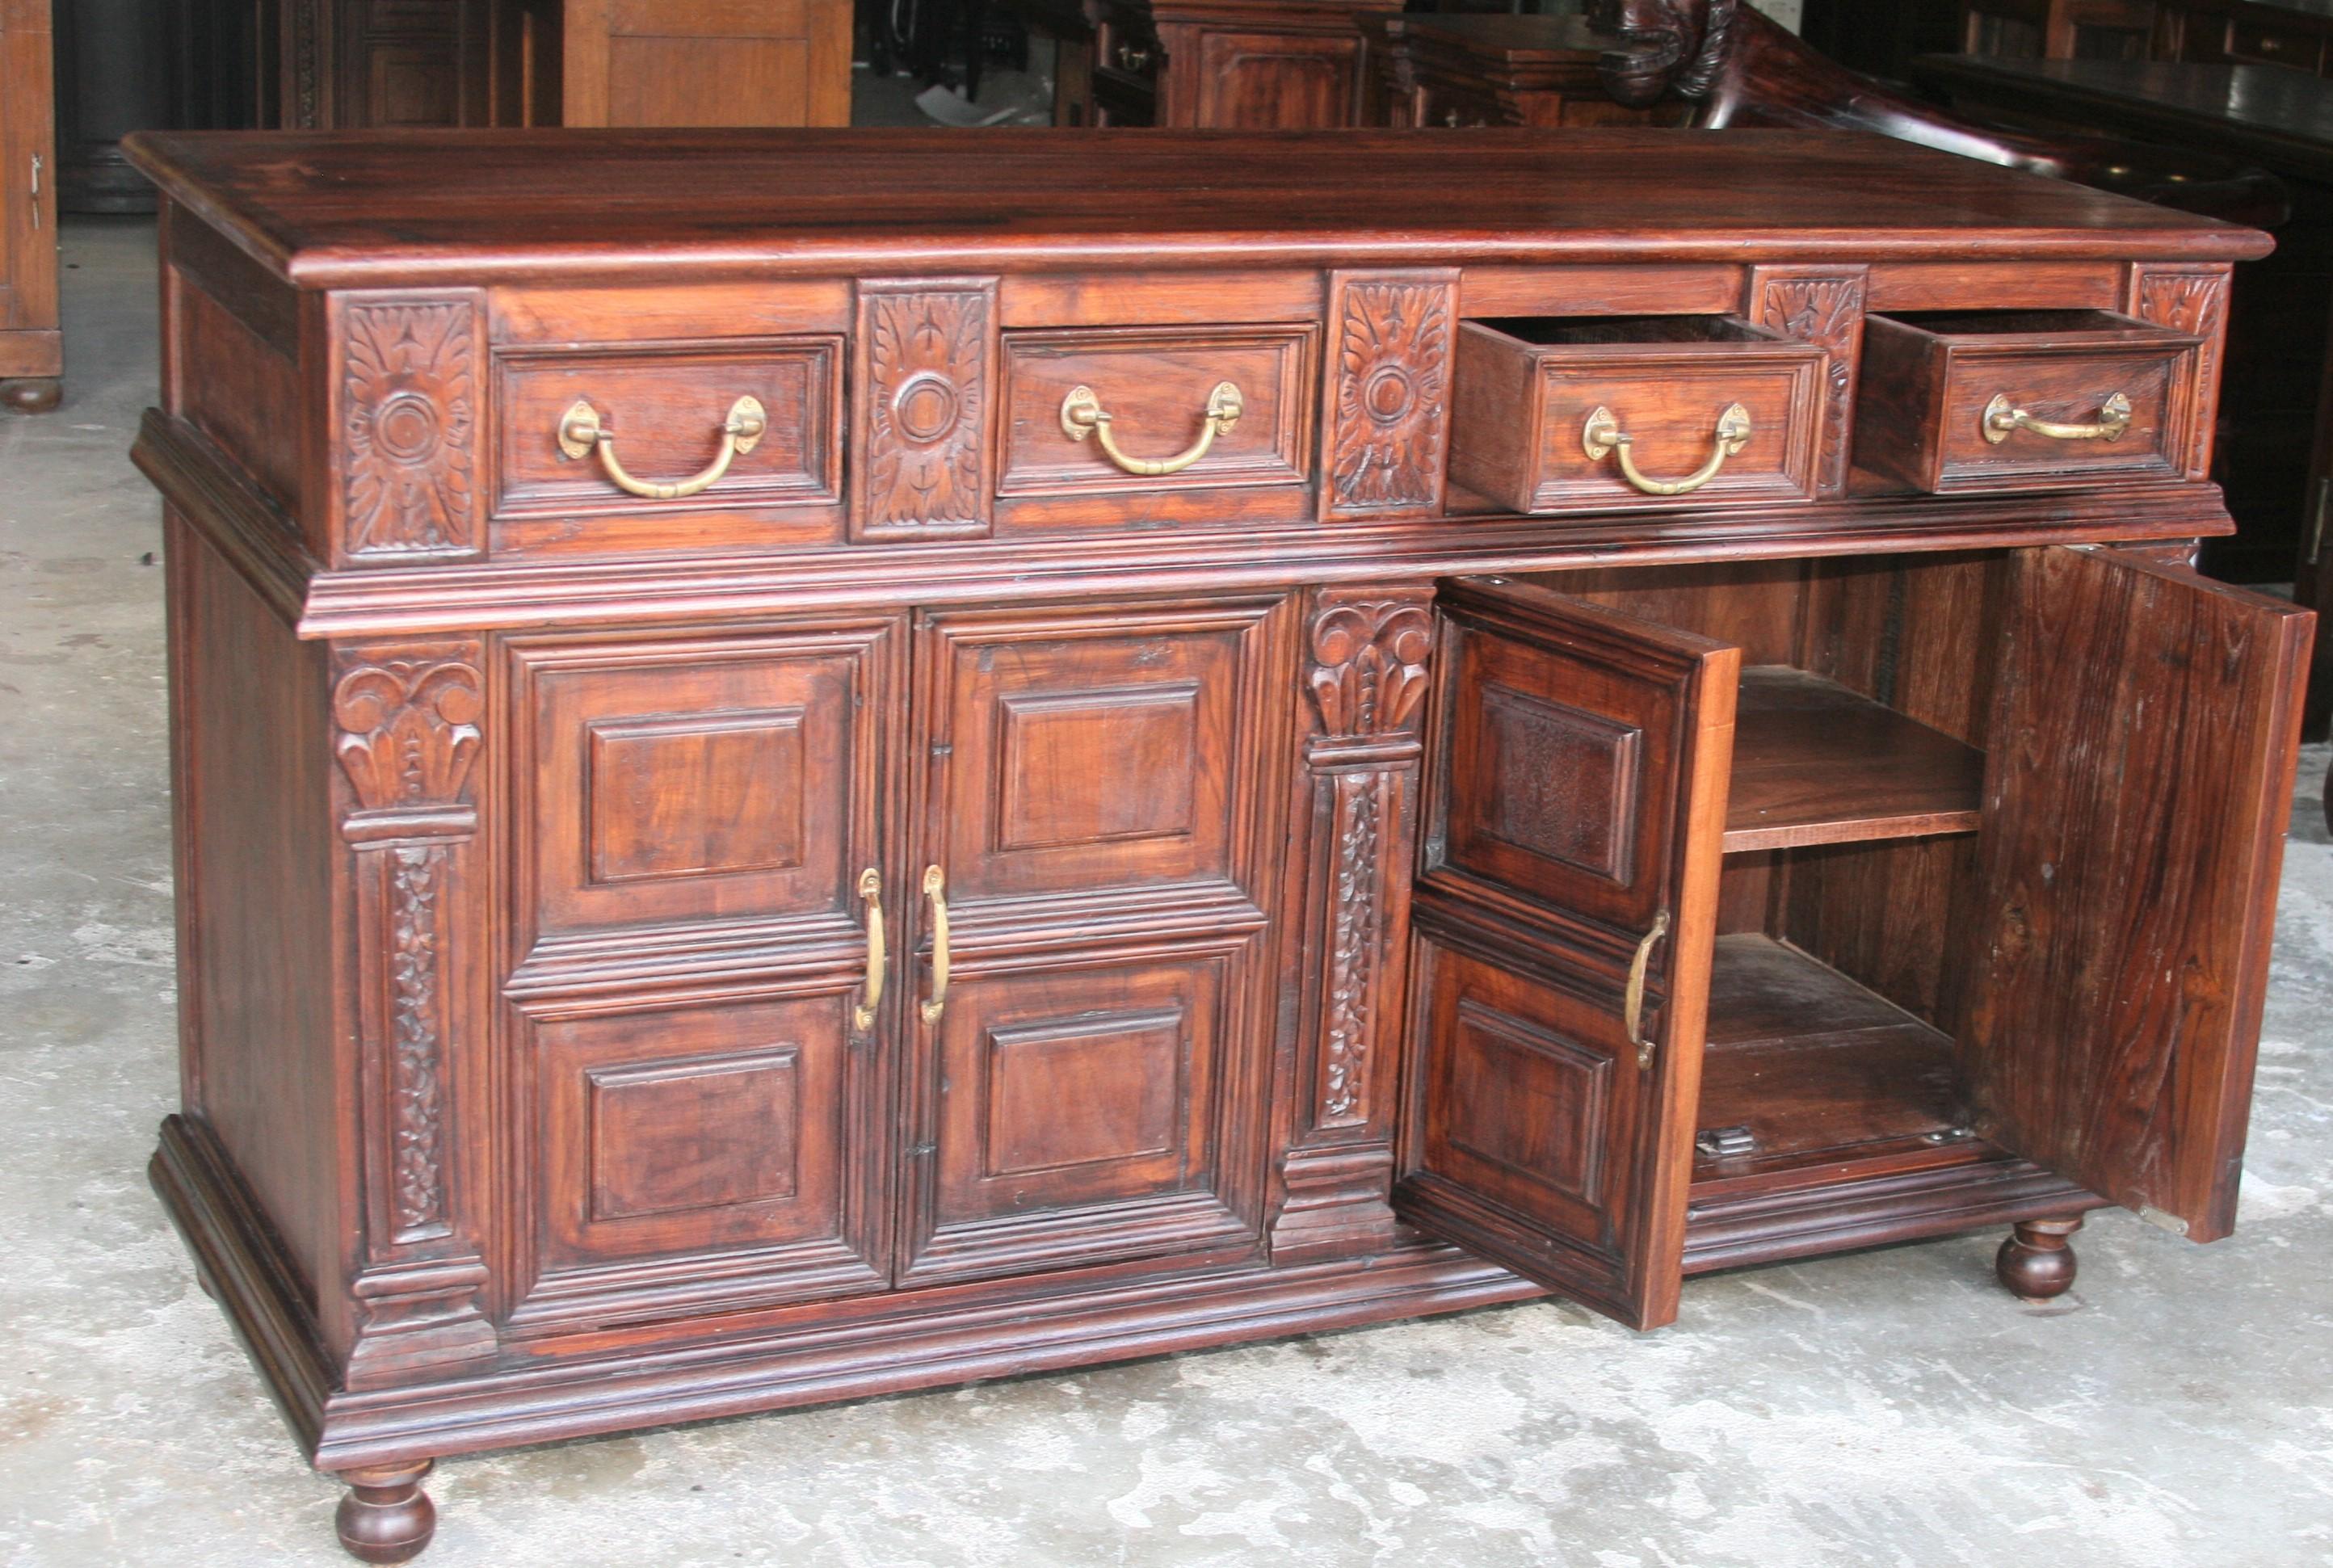 Solid Teak Wood Early 20th Century Superbly Crafted French Colonial Credenza For Sale 3